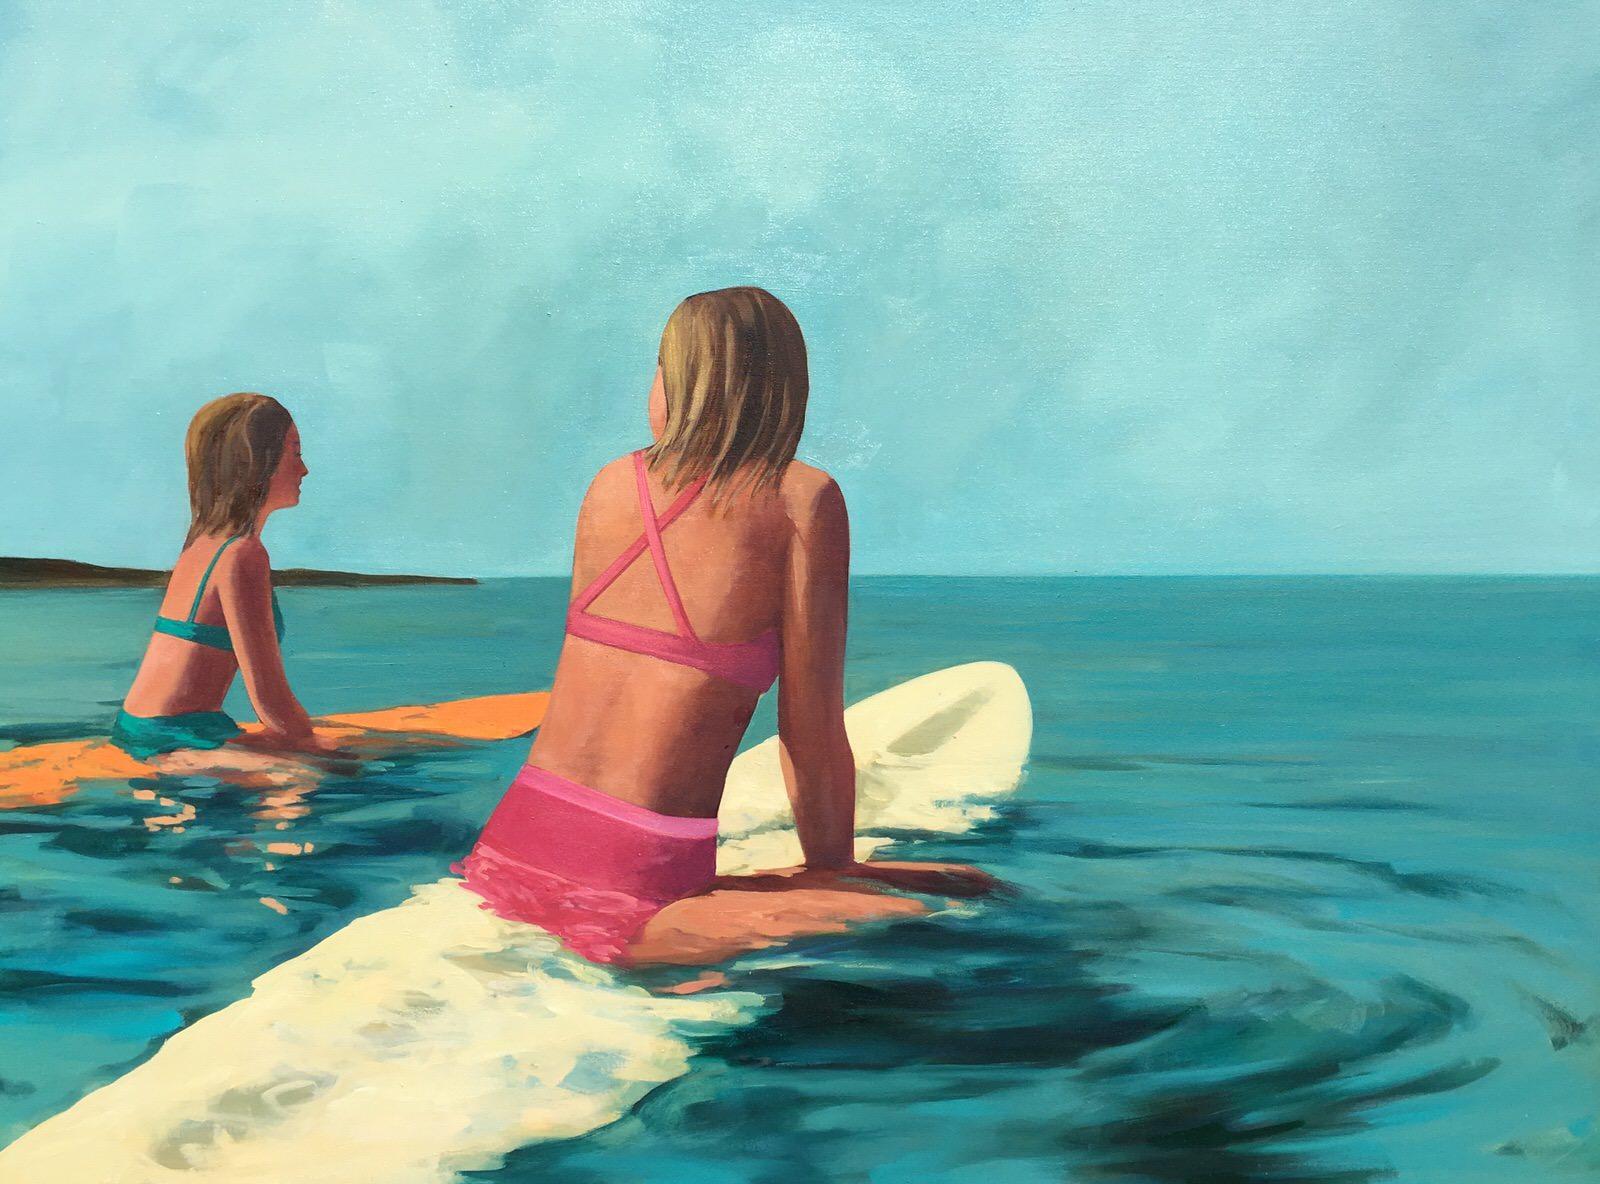 T.S. Harris Figurative Painting - "Waiting for Waves" oil painting of two girls floating on surfboards in ocean